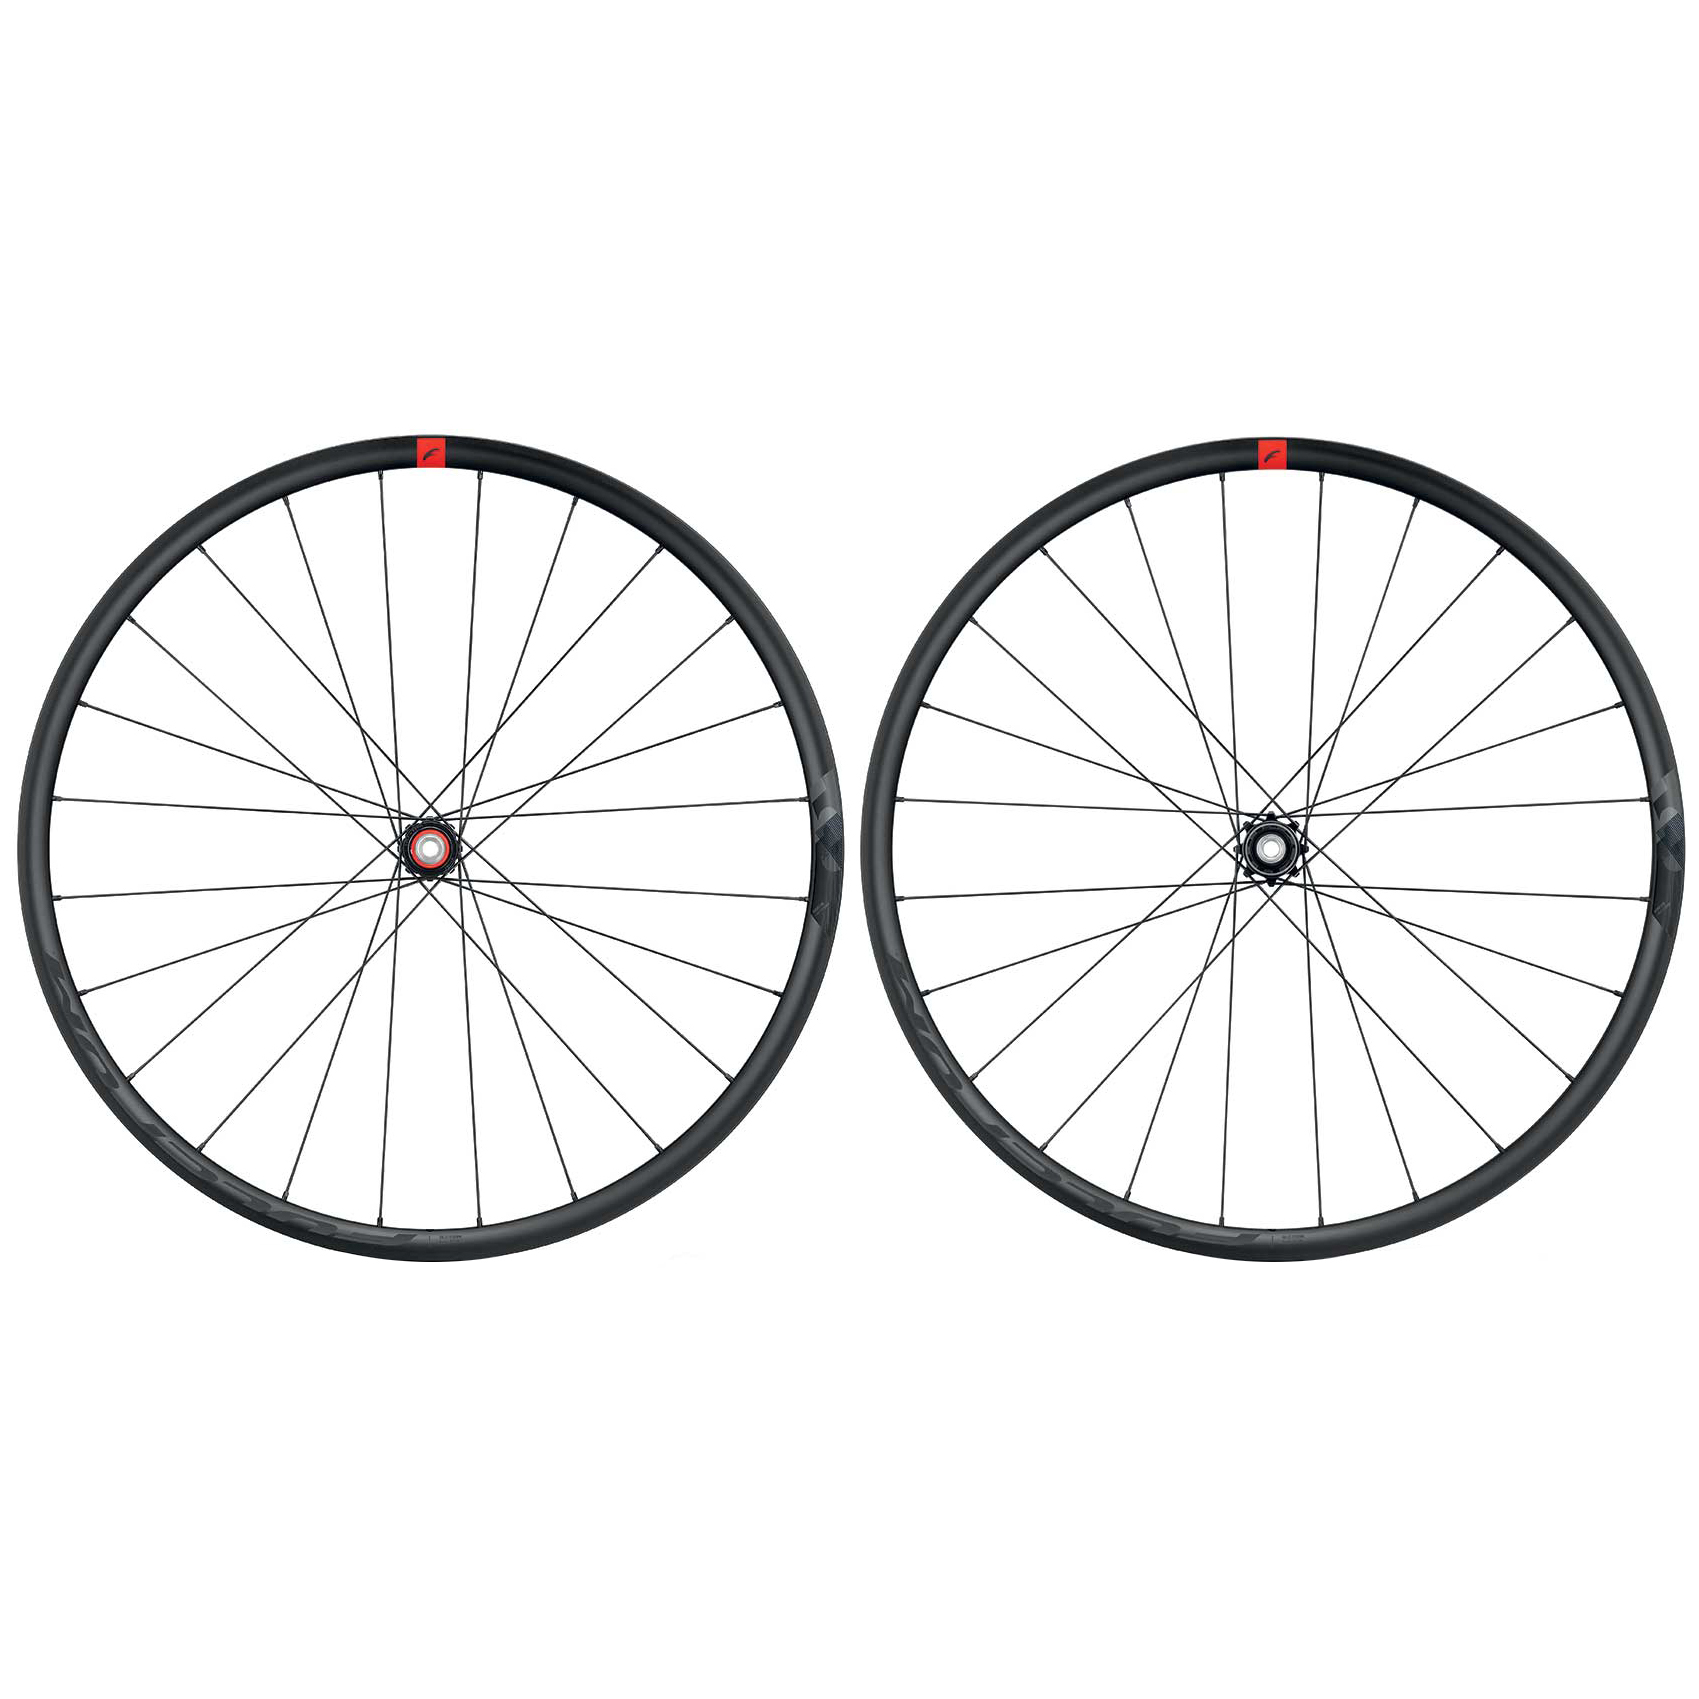 Picture of Fulcrum Racing 5 DB Wheelset - Clincher - Centerlock - FW: 12x100mm | RW: 12x142mm - Campagnolo N3W